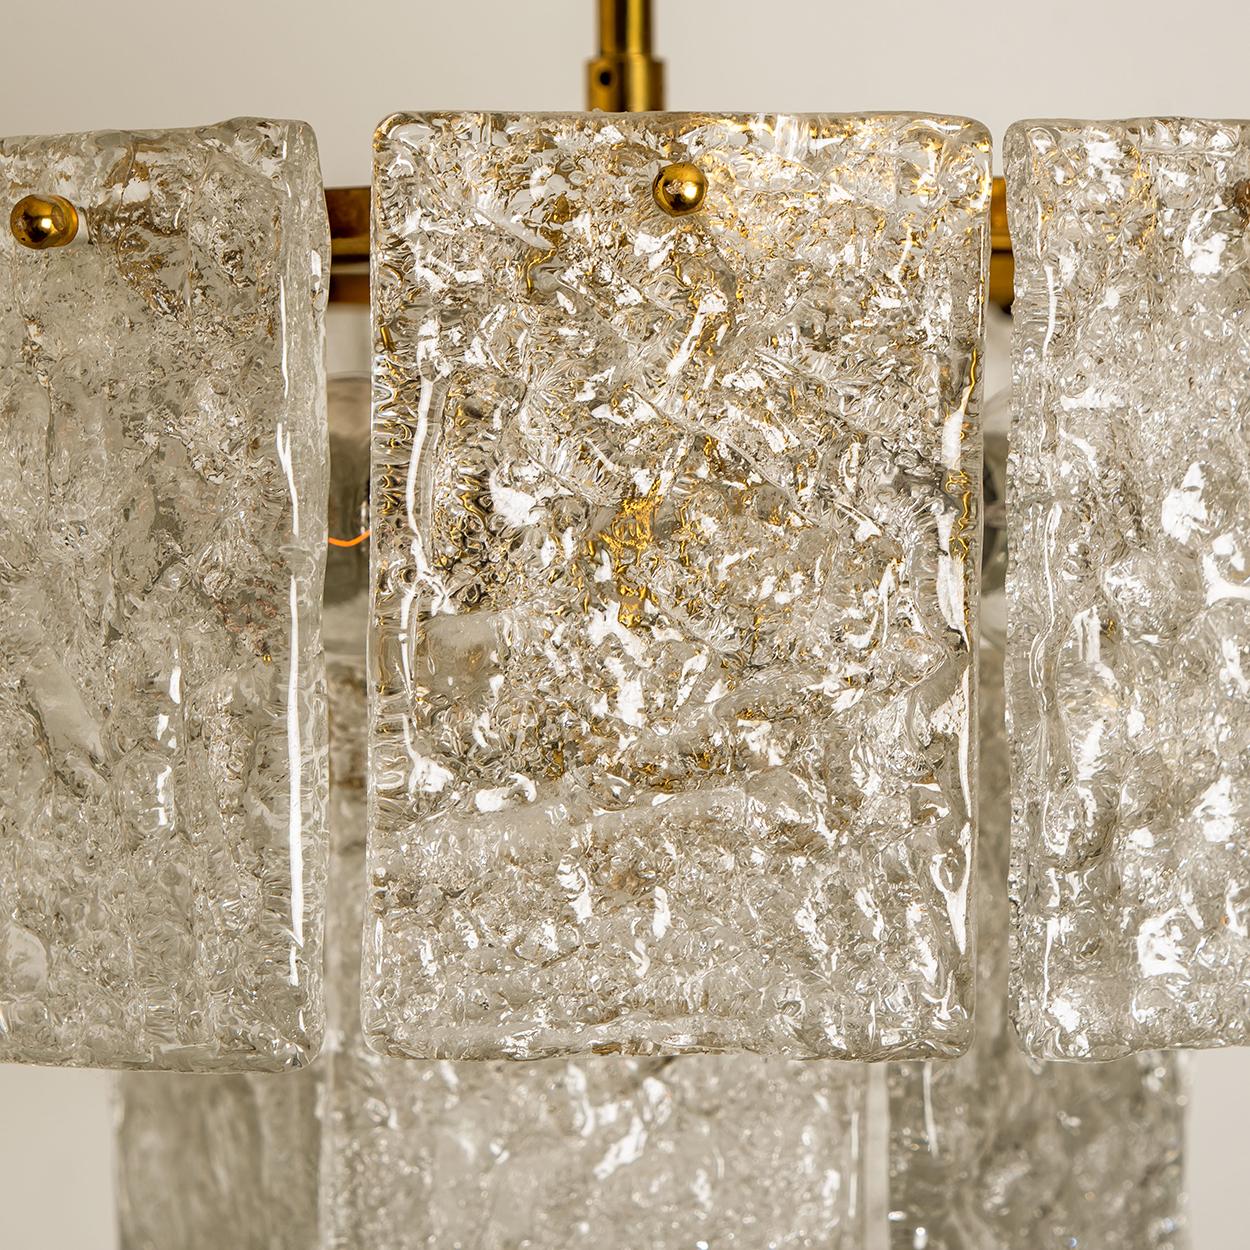 German 1 of the 2 of Glass and Brass Two Tiers Light Fixtures from Hillebrand, 1960s For Sale